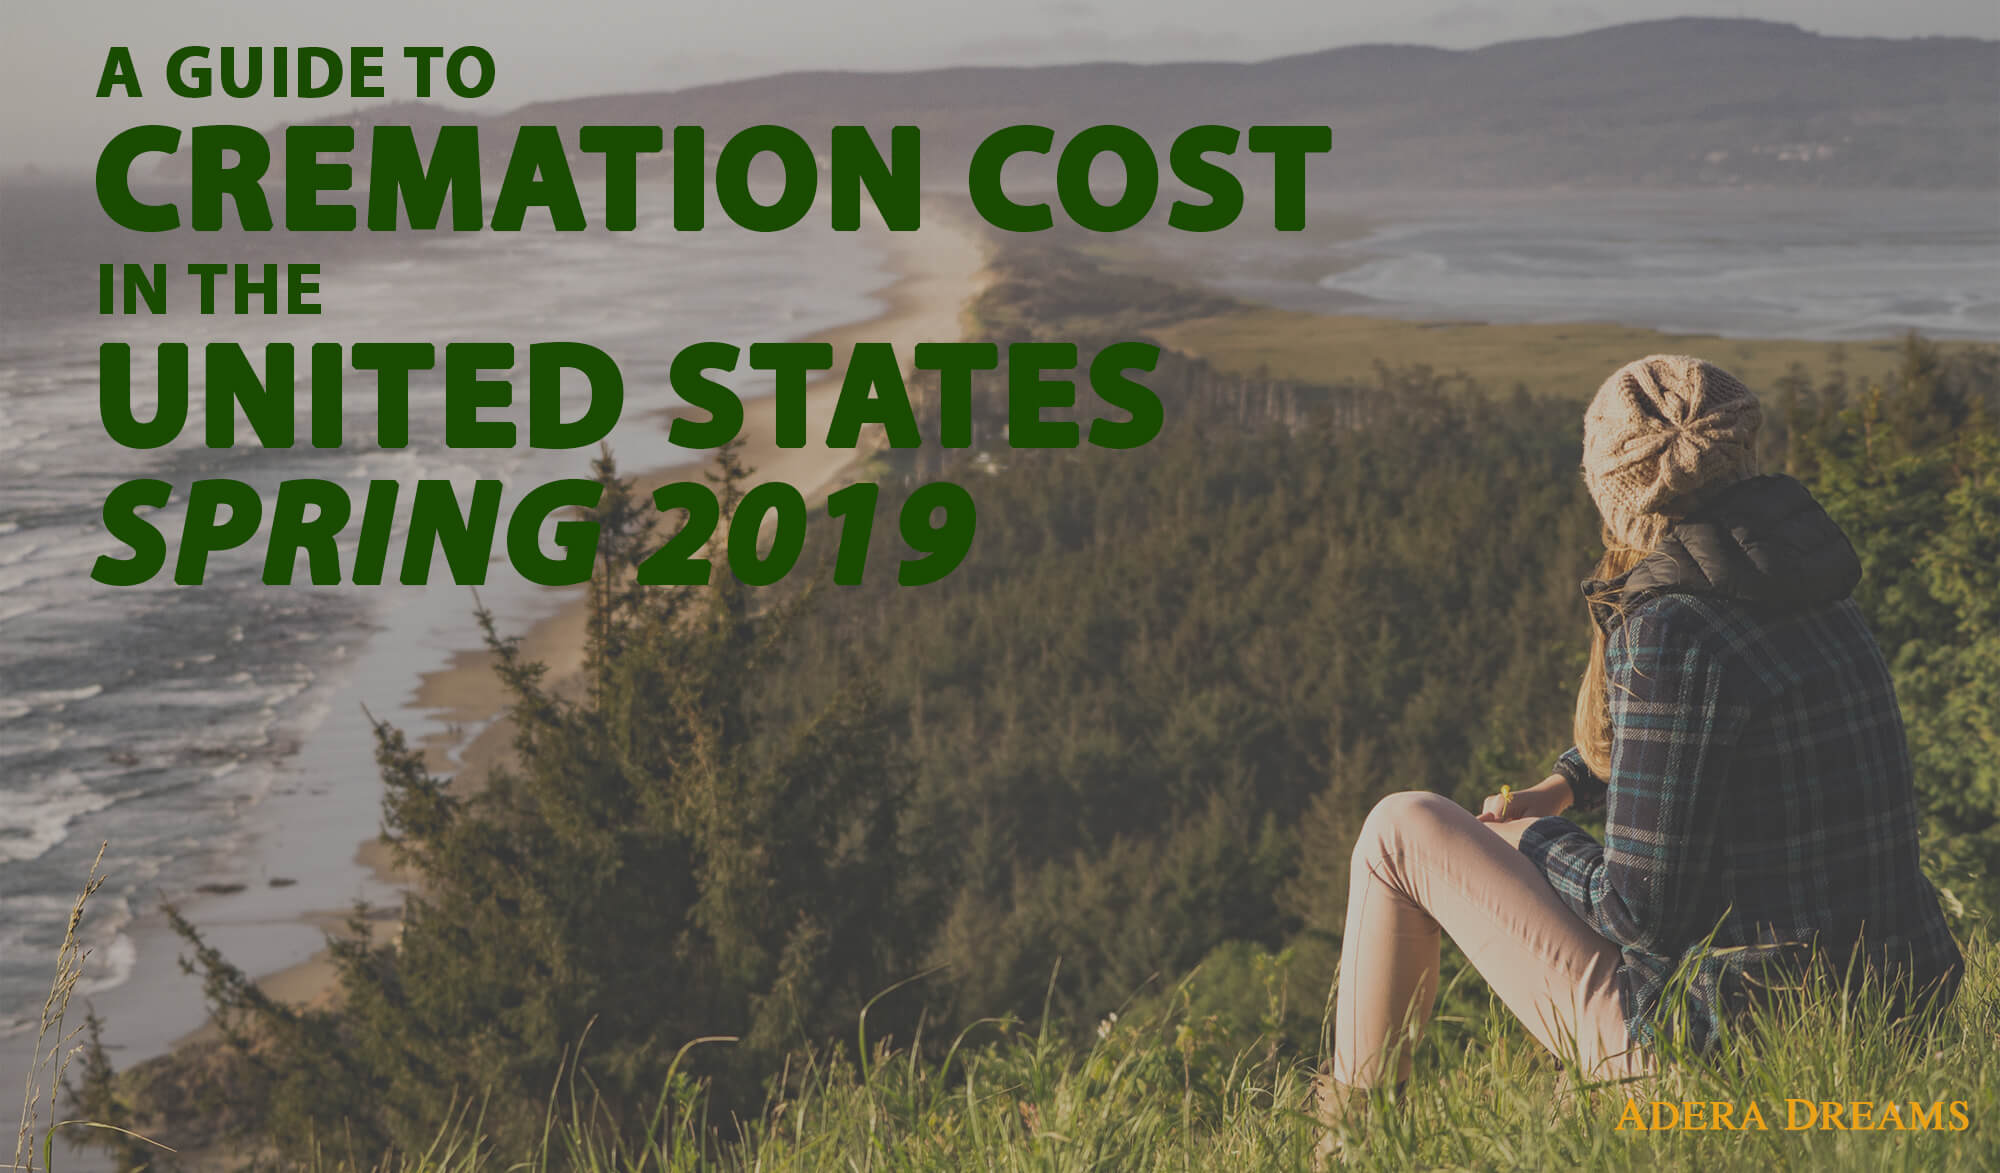 The Cost of Cremation in the United States (Spring 2019)